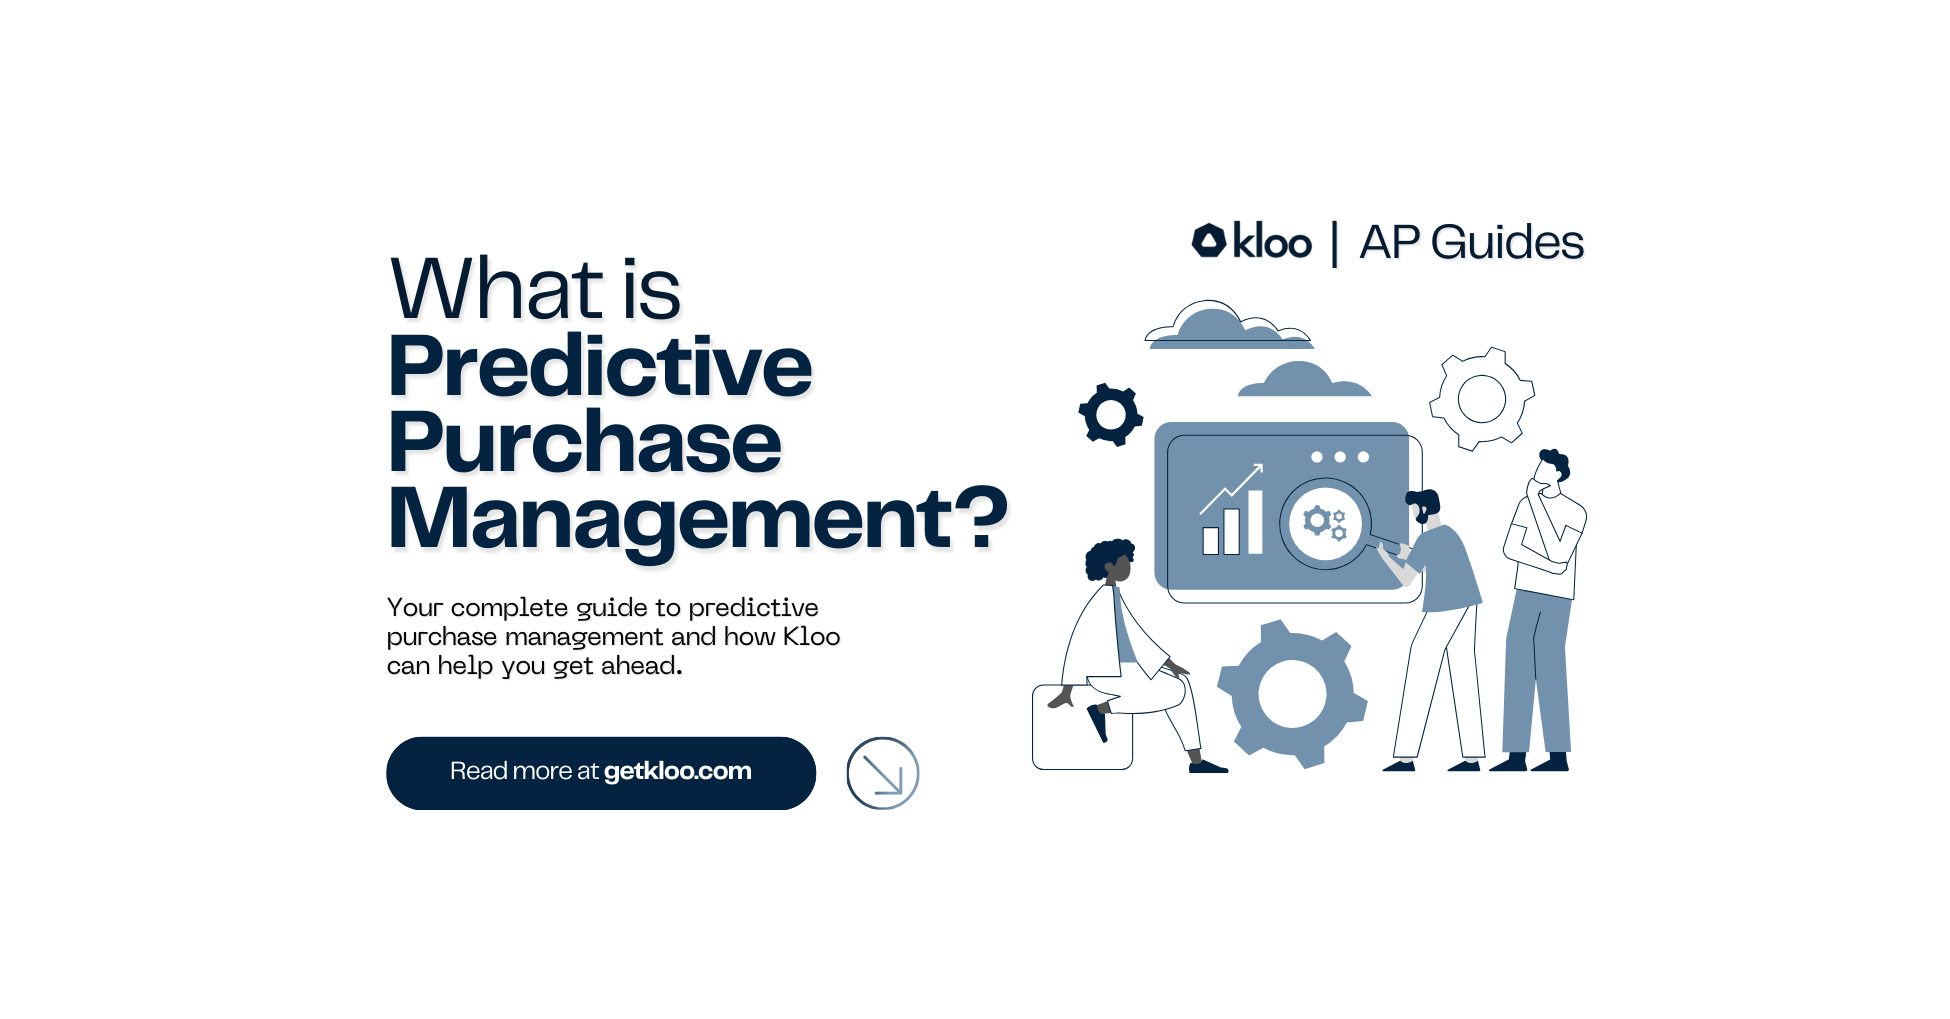 Everything You Need to Know about Predictive Purchase Management